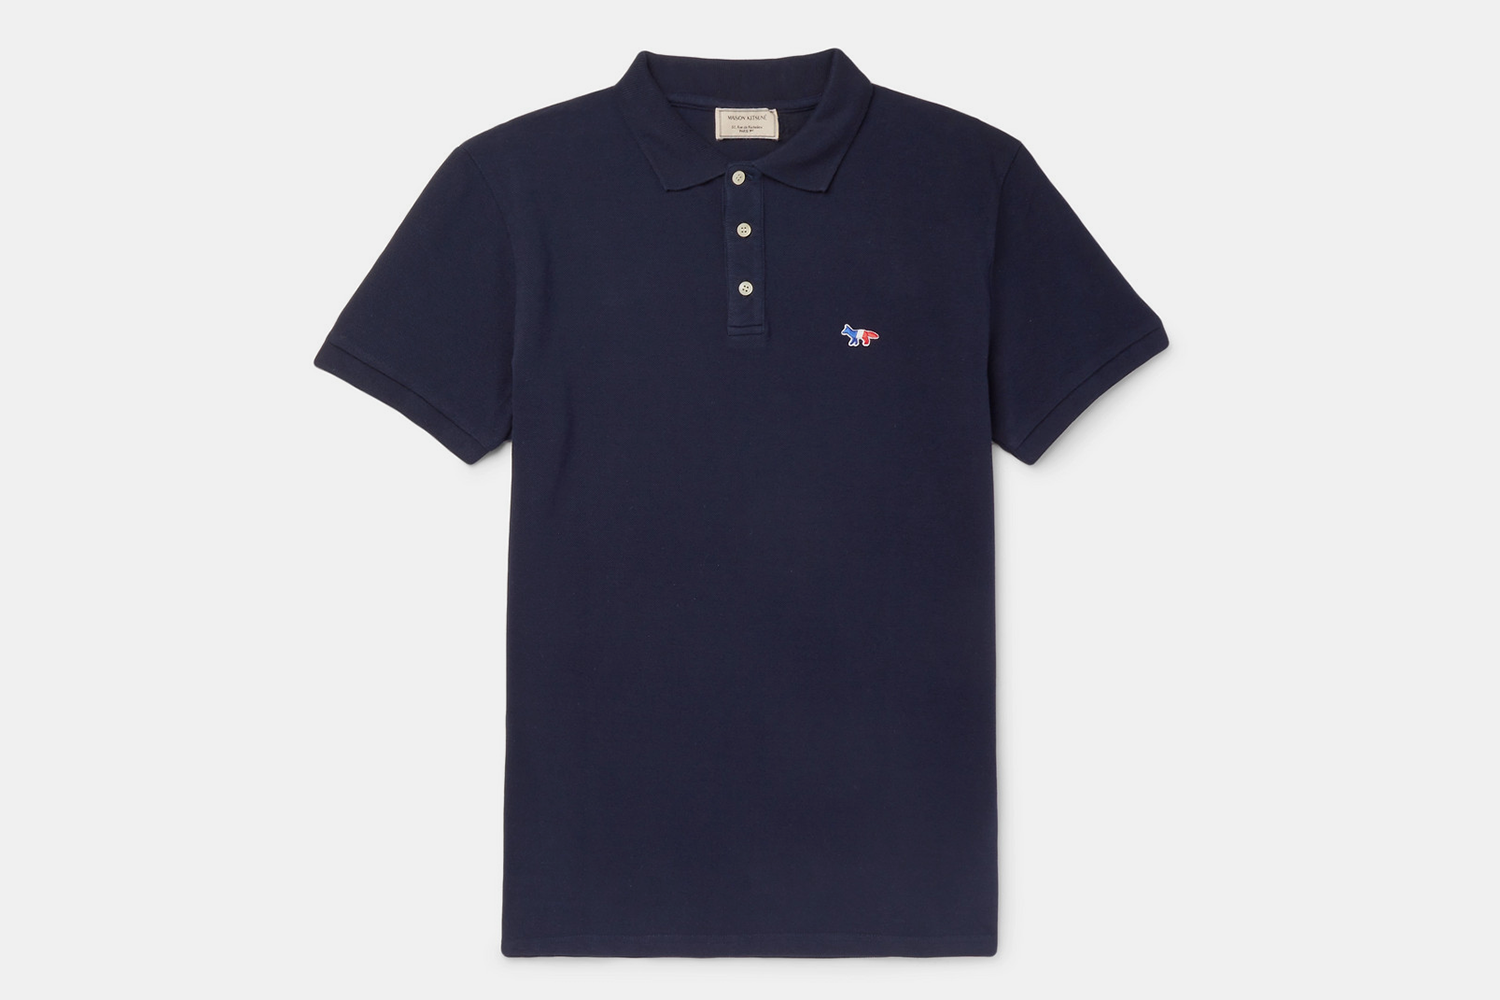 Buy > alligator on polo shirt > in stock